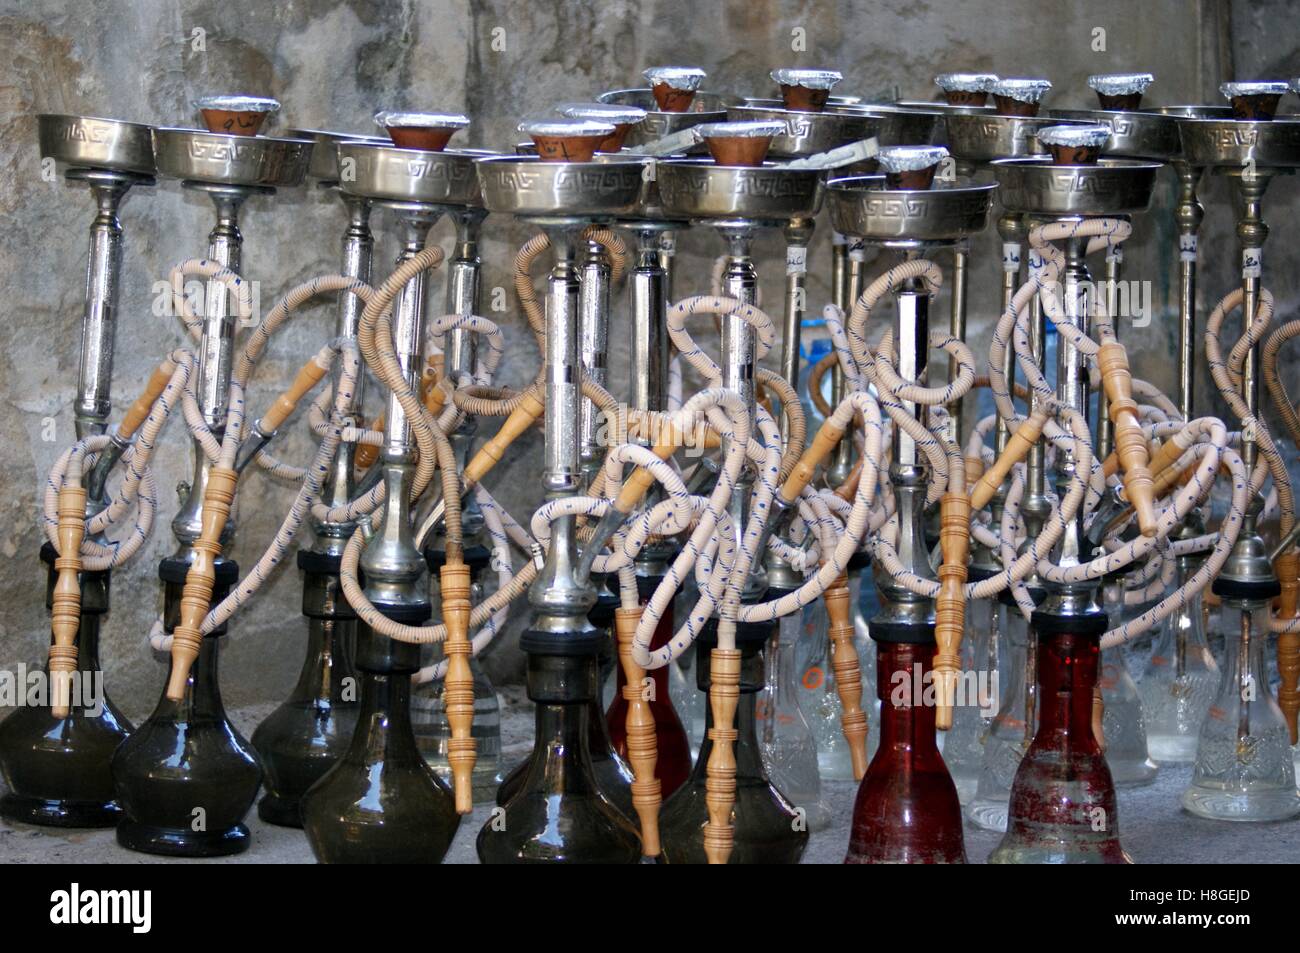 A group of shisha pipes, also known as argileh or narghile, outside a Beirut, Lebanon cafe. Stock Photo